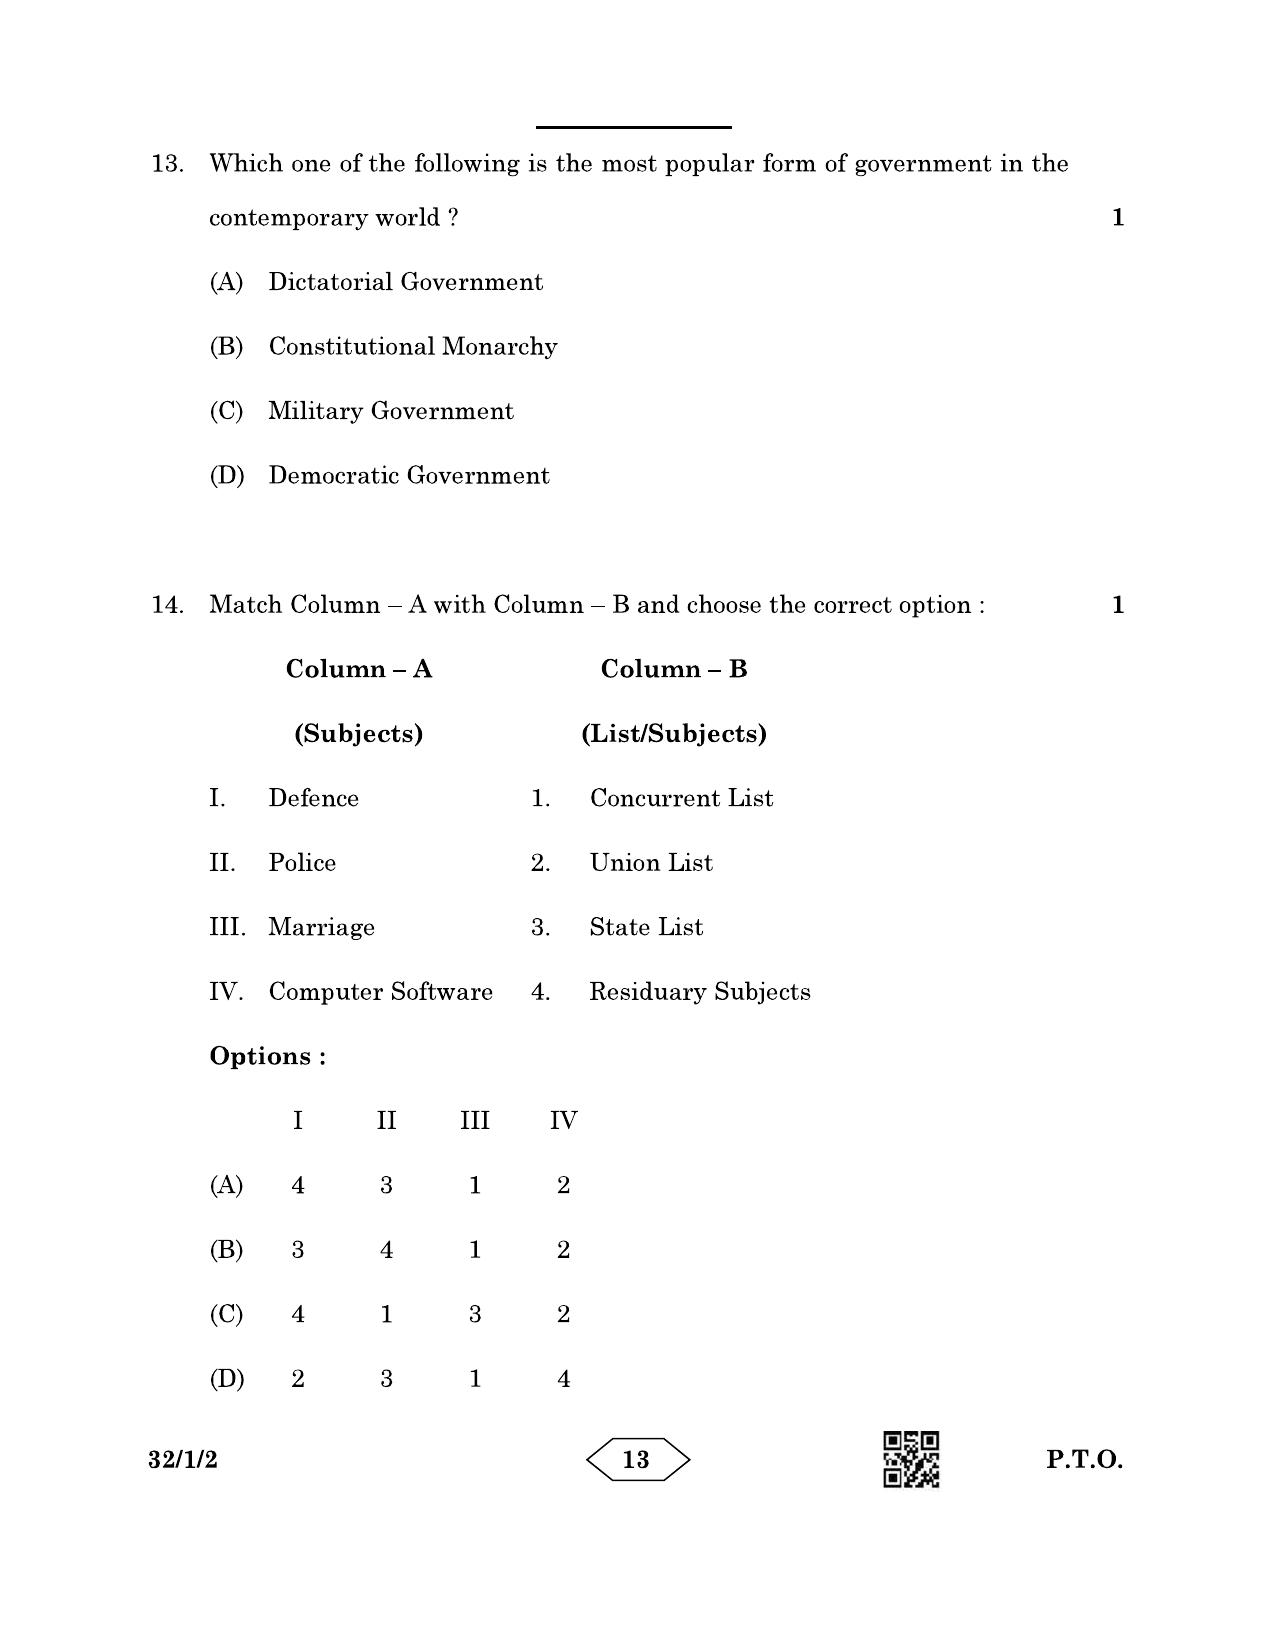 CBSE Class 10 32-1-2 Social Science 2023 Question Paper - Page 13